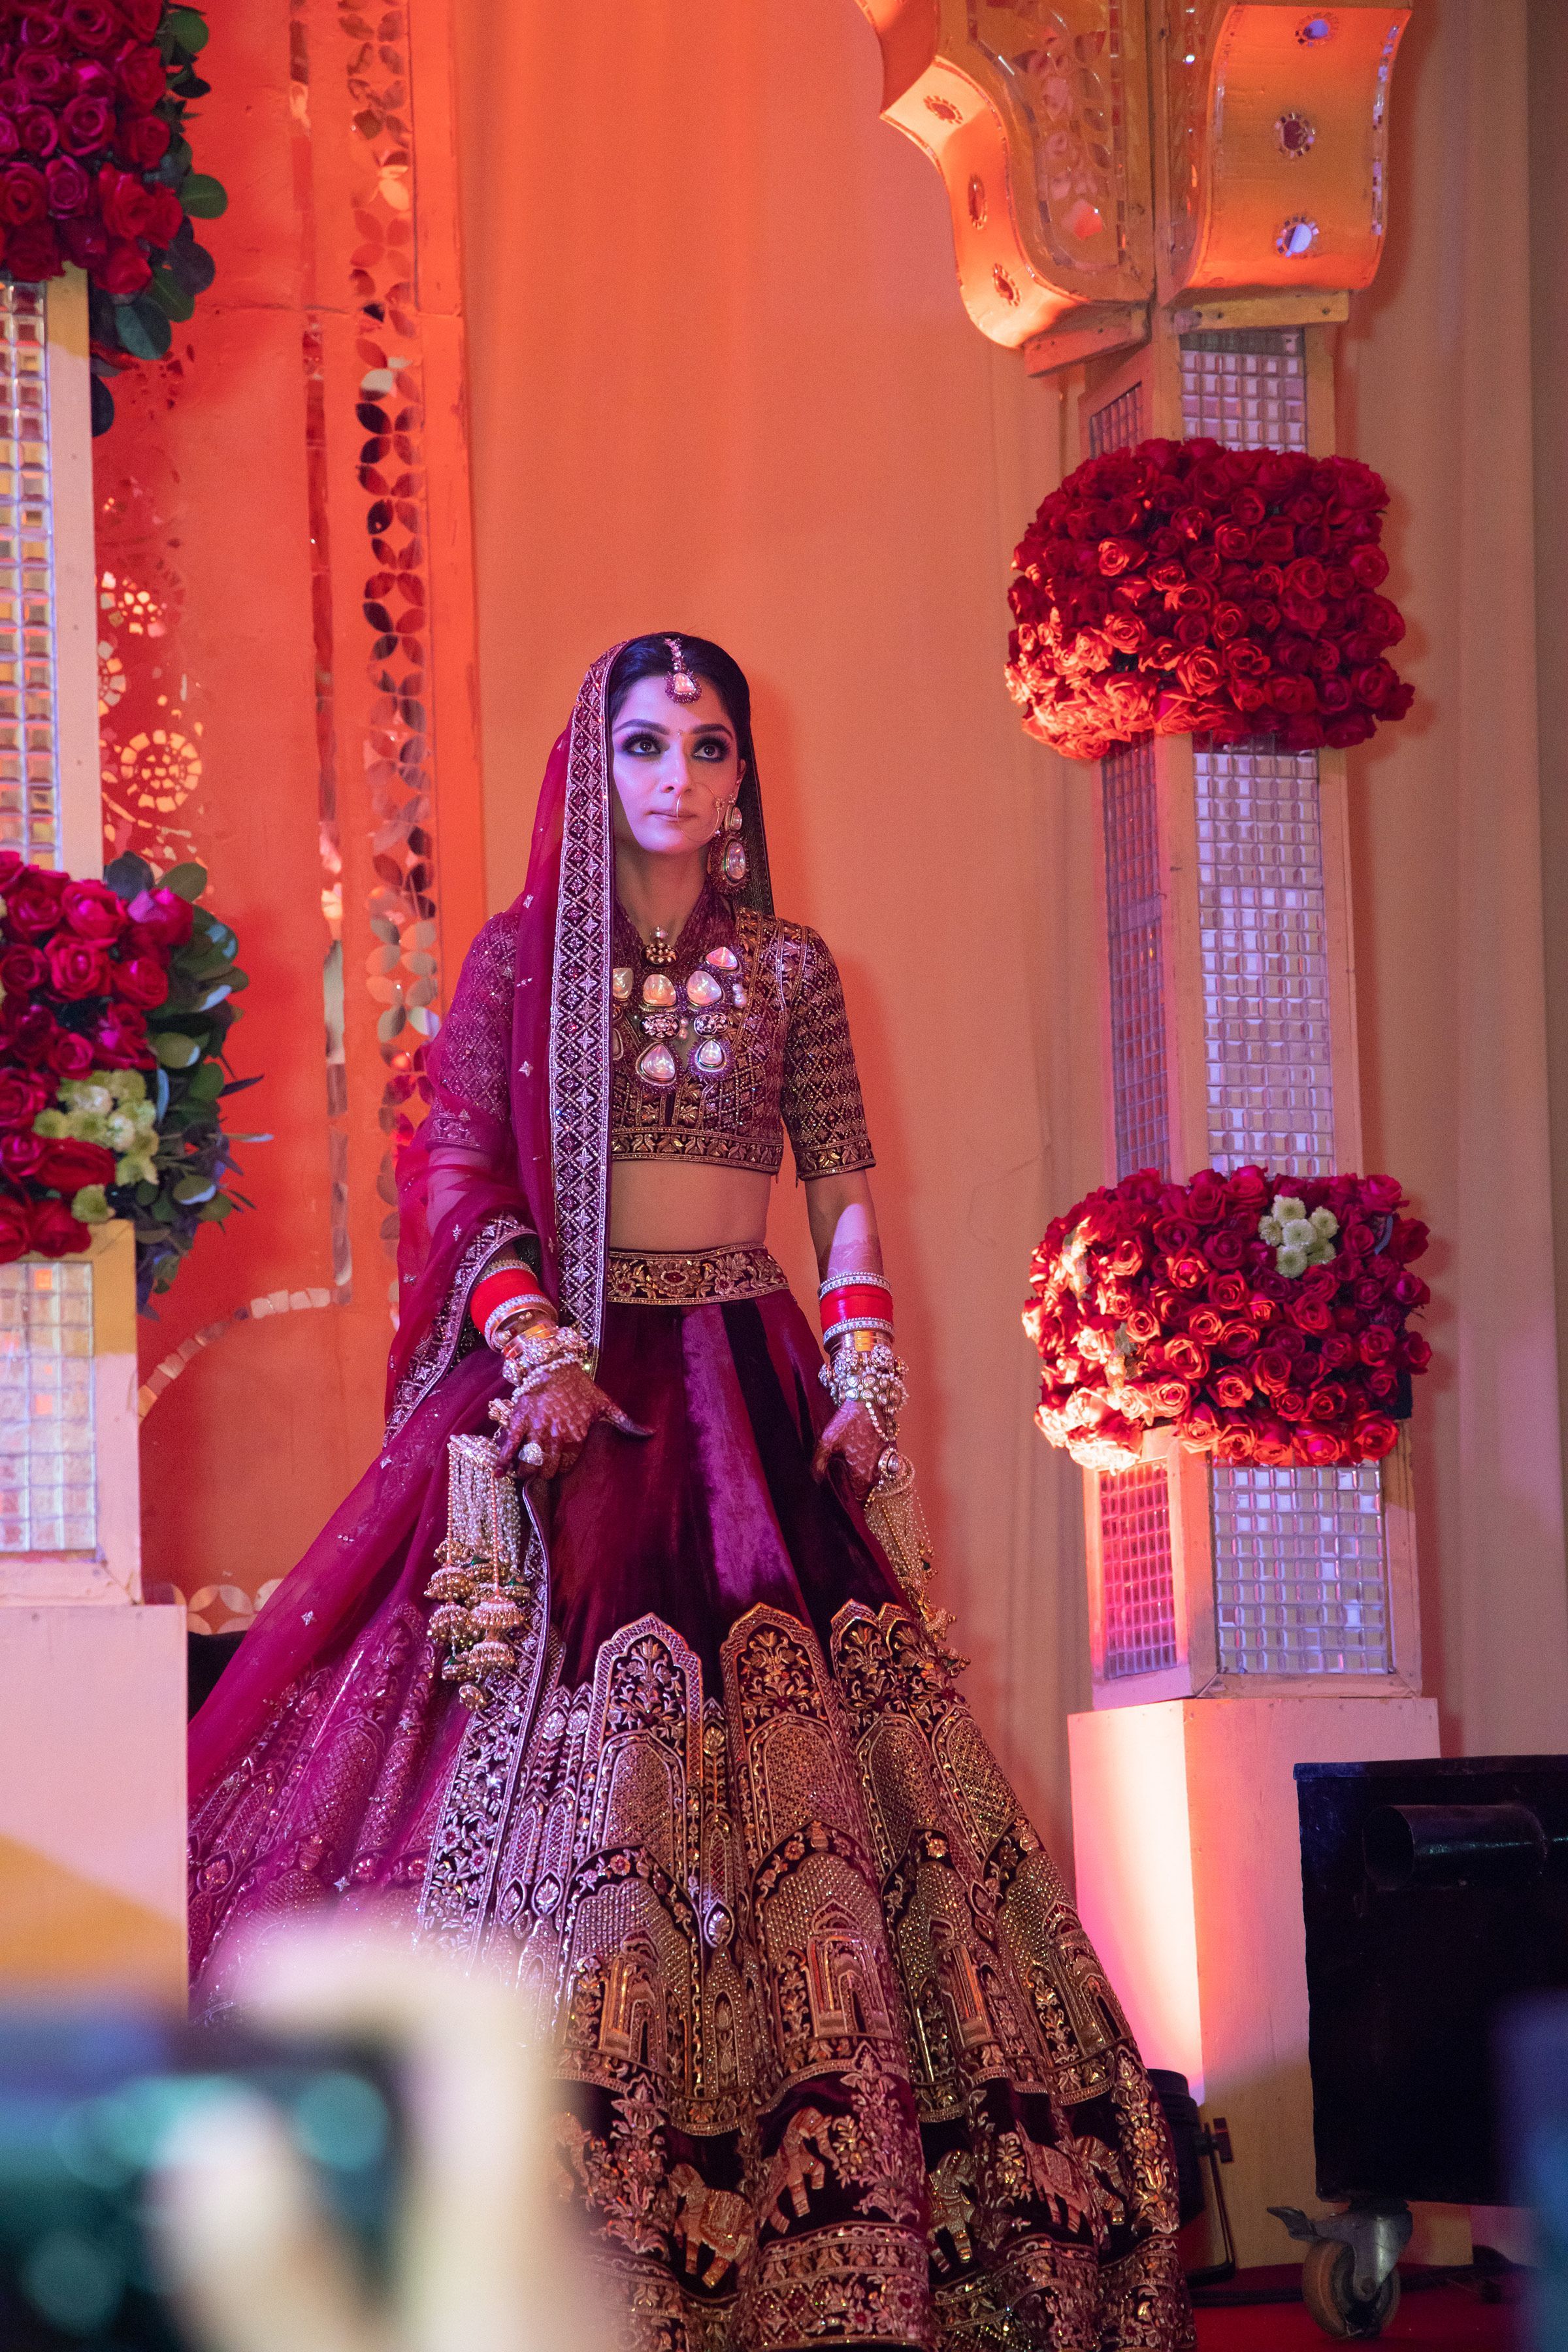 Elegant Delhi Wedding With Bride In Some Stunning Outfits -   12 dress Indian jewels ideas